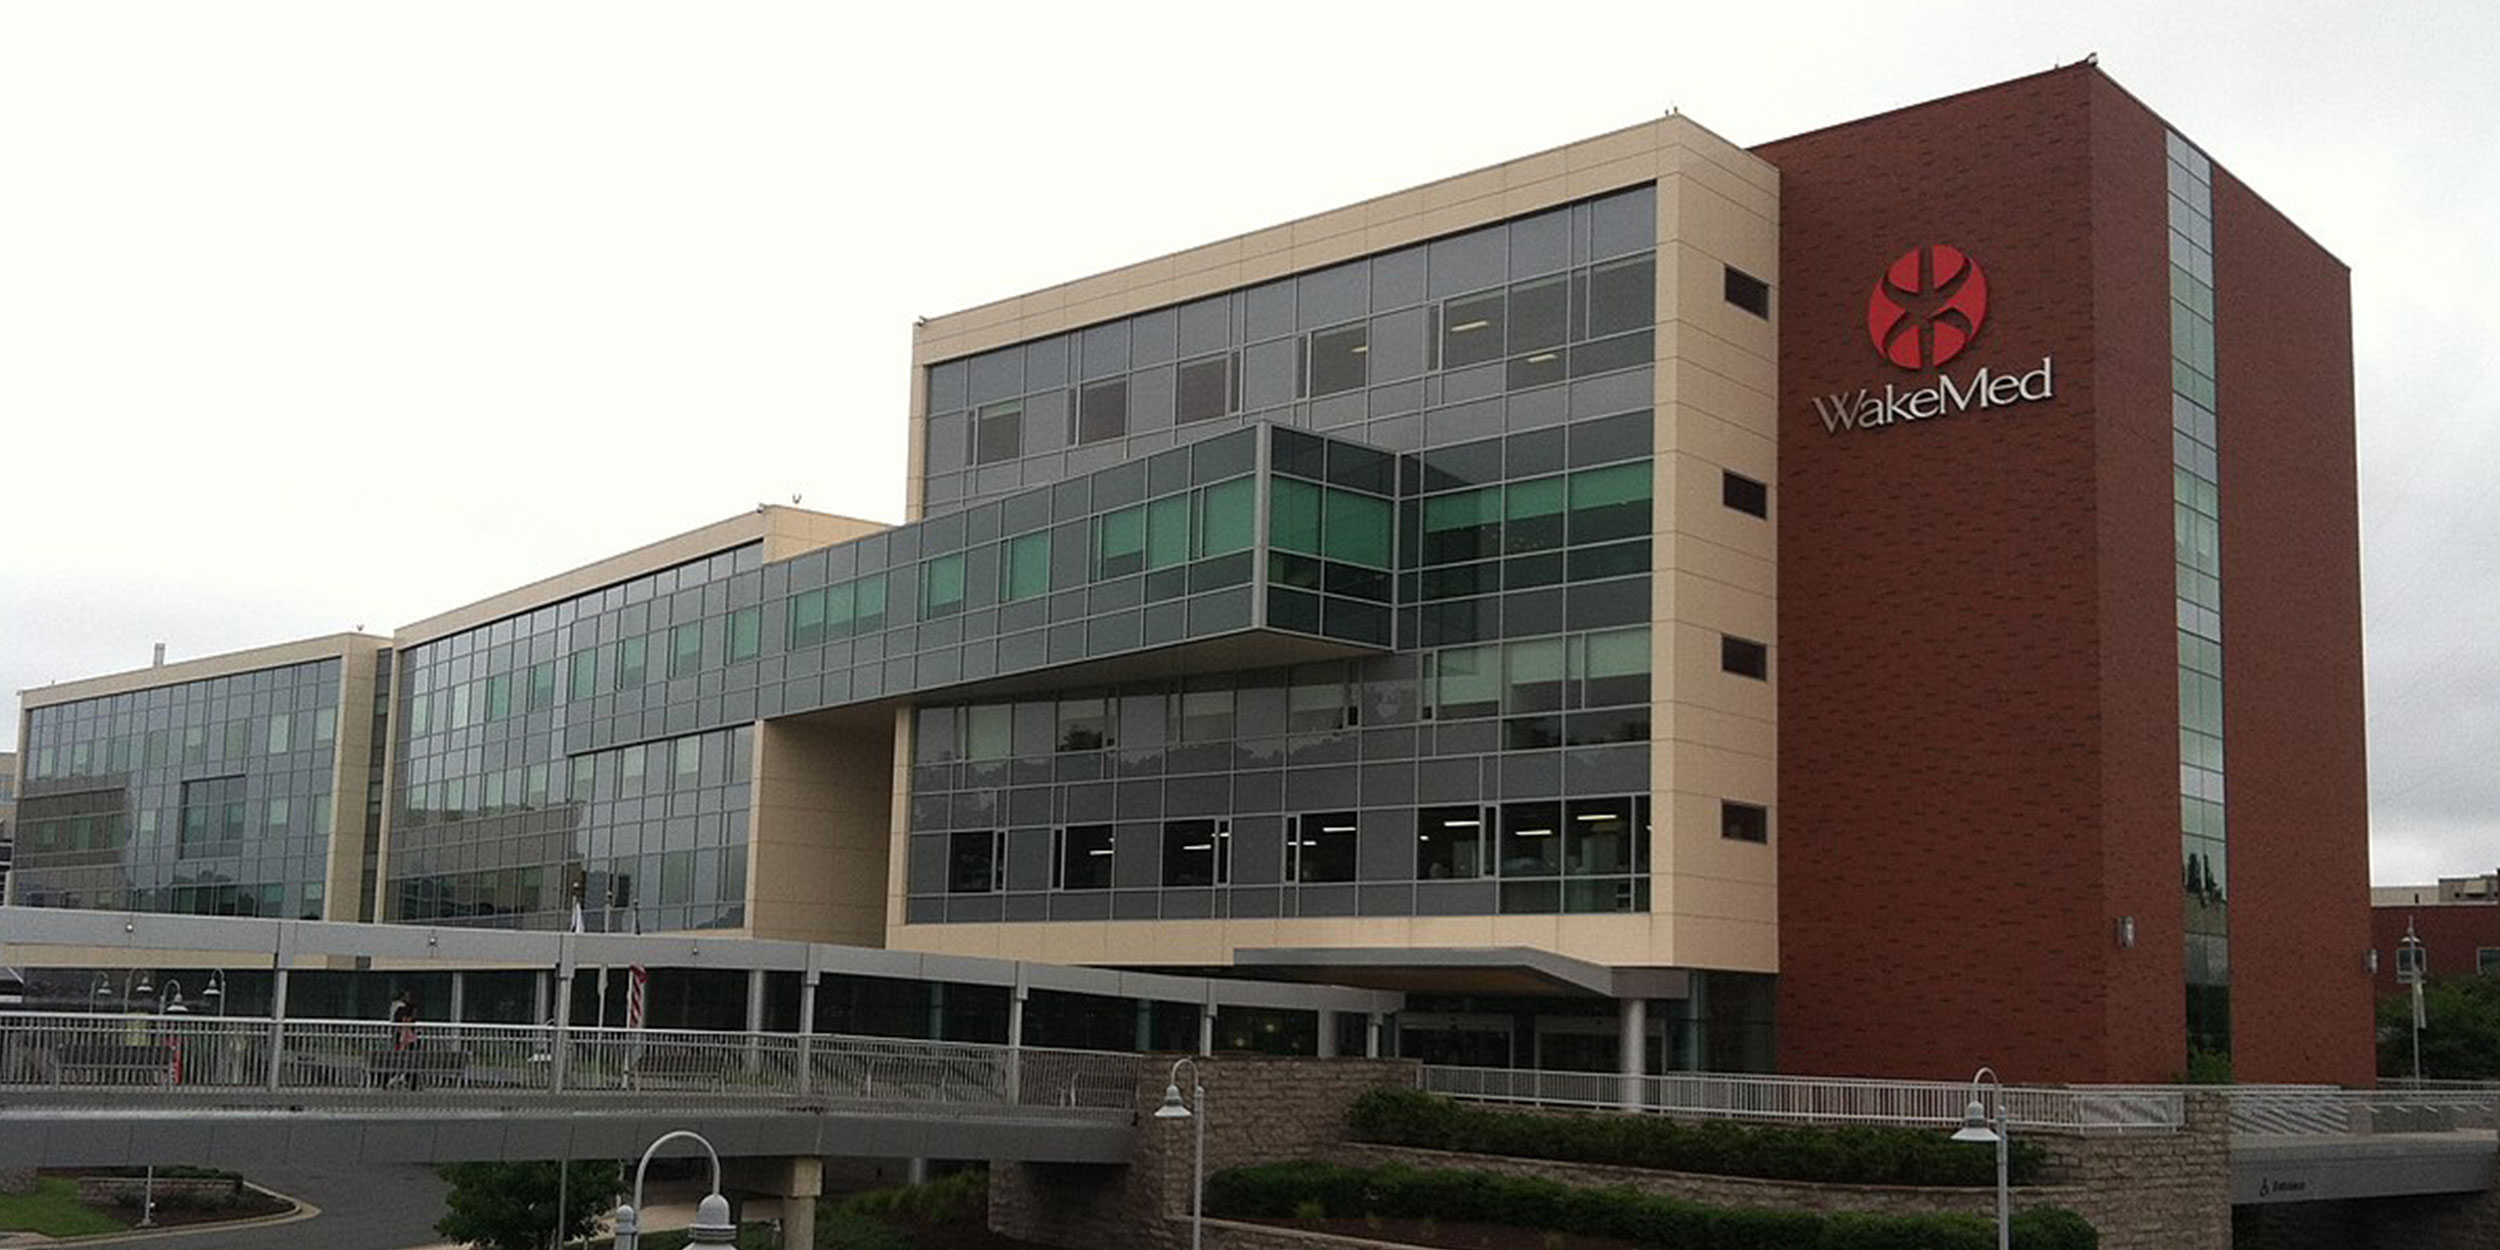 Exterior view of WakeMed hospital